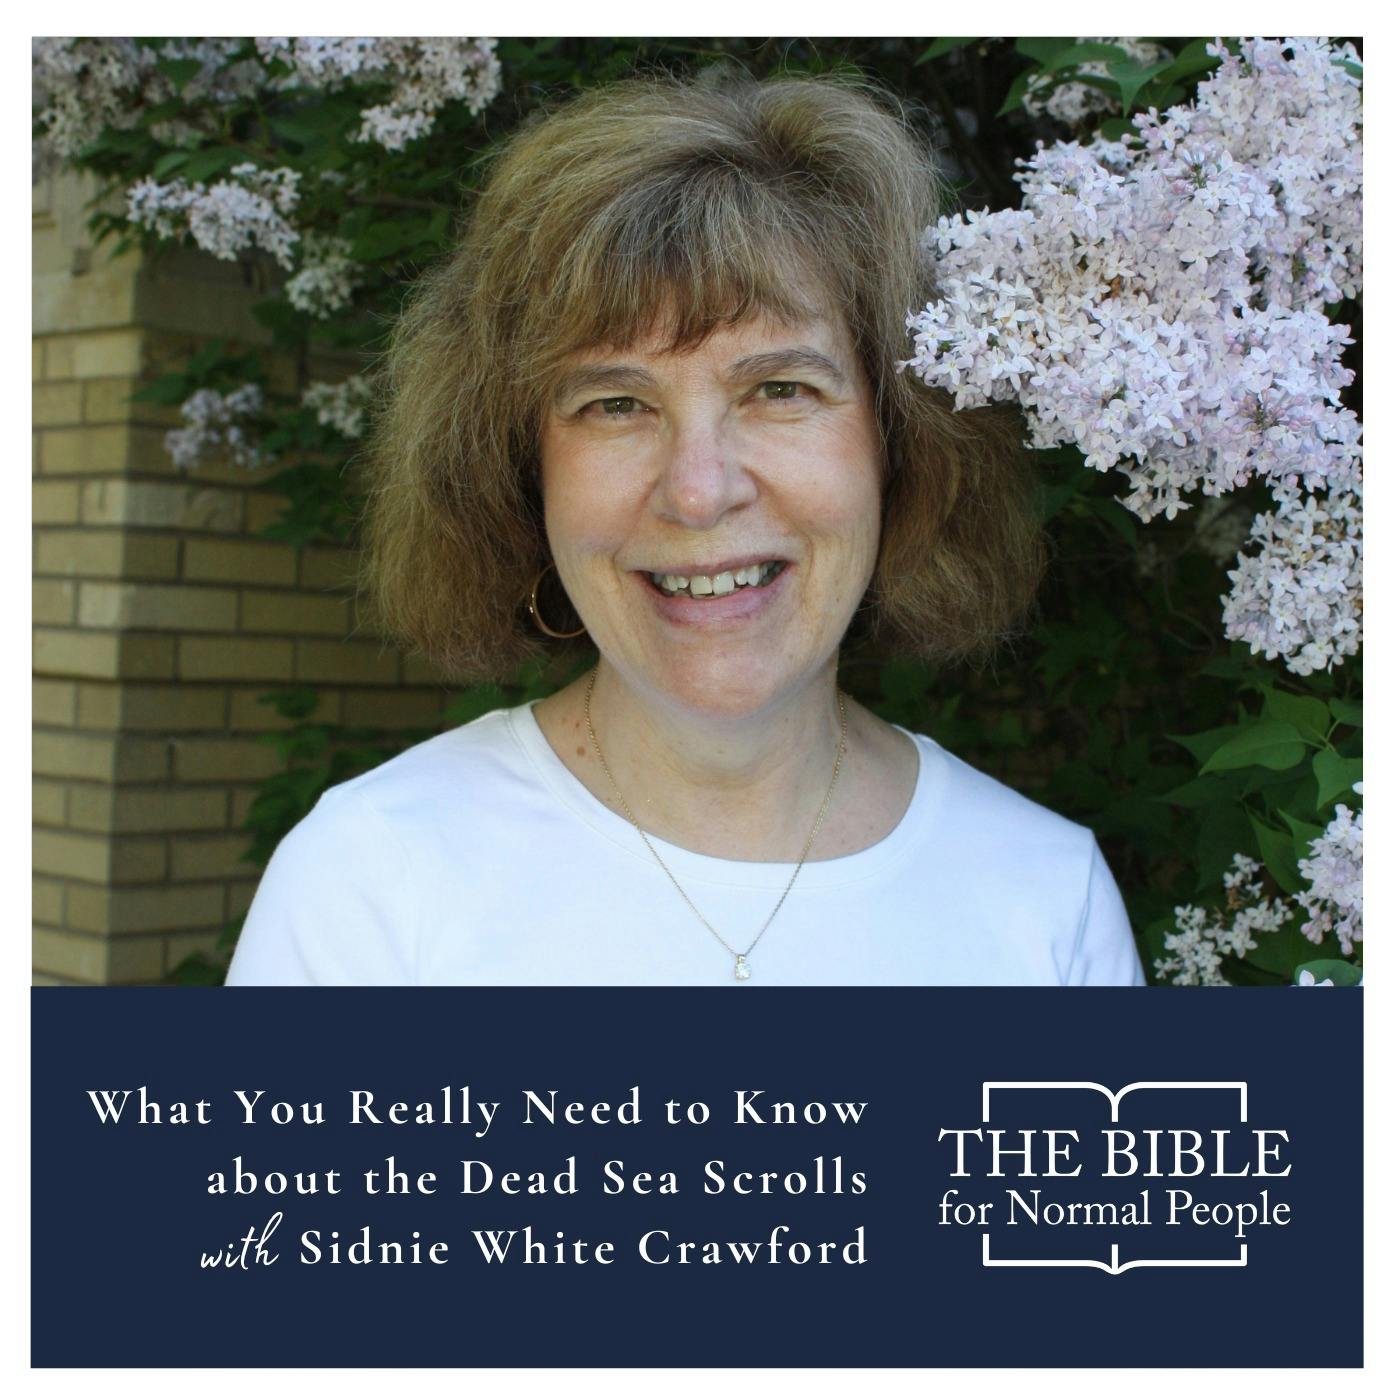 Episode 210: Sidnie White Crawford - What You Really Need to Know about the Dead Sea Scrolls